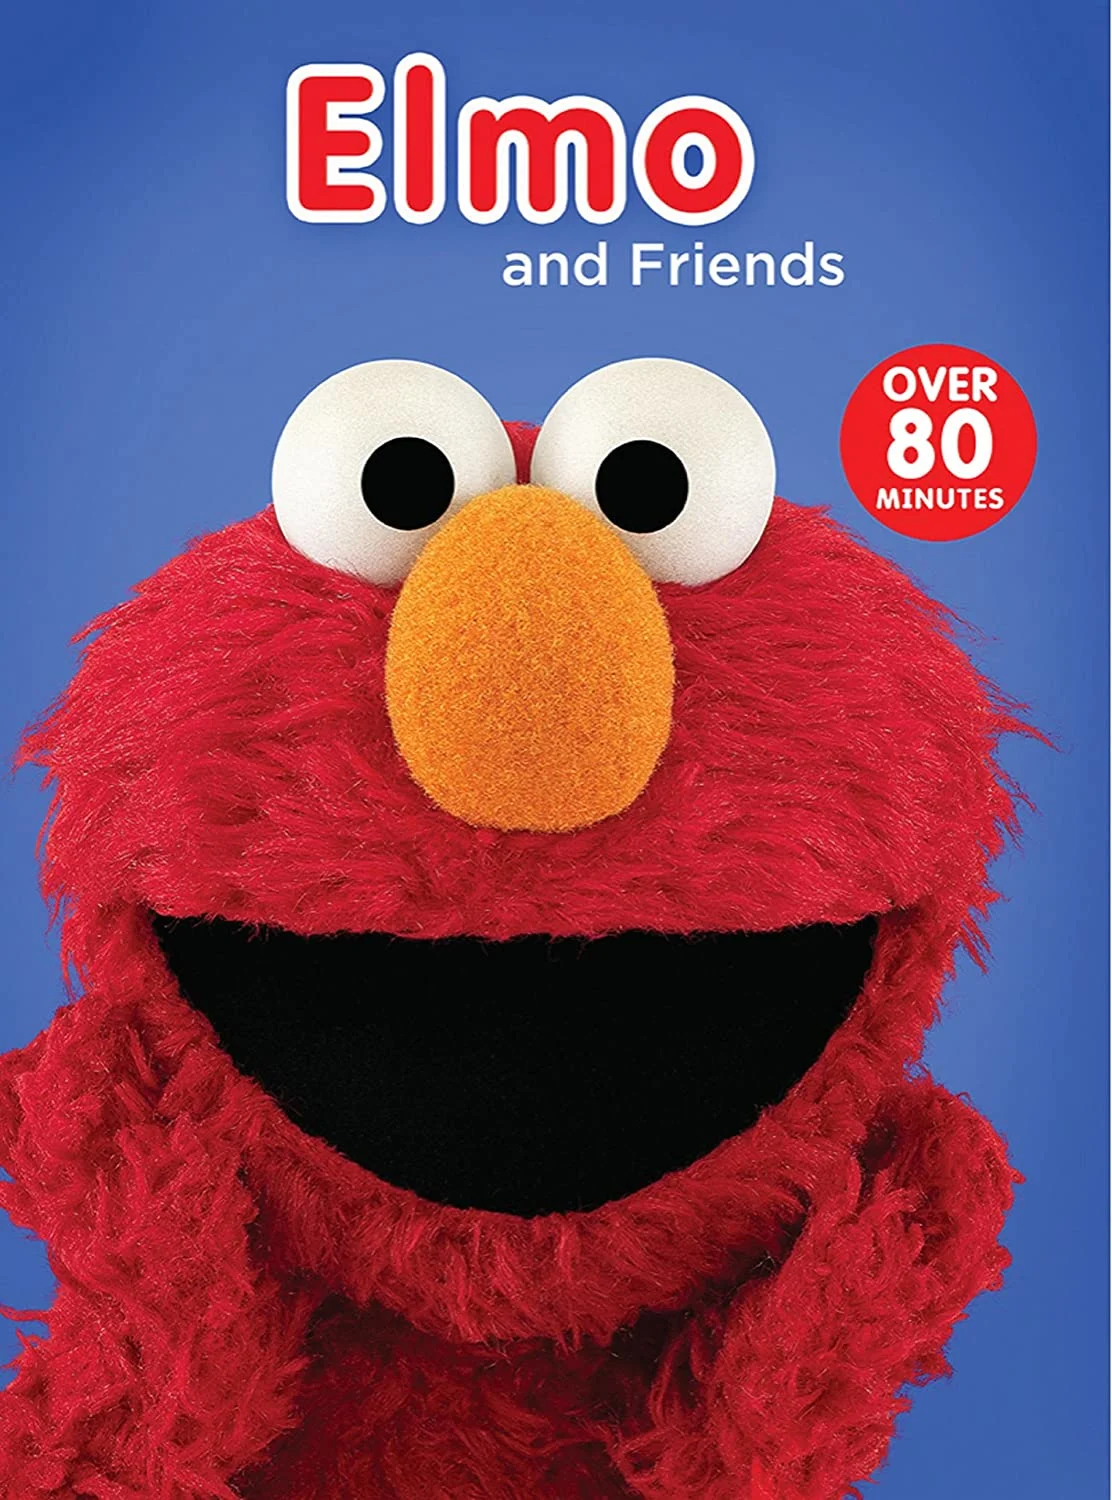 Elmo and Friends (DVD) on MovieShack